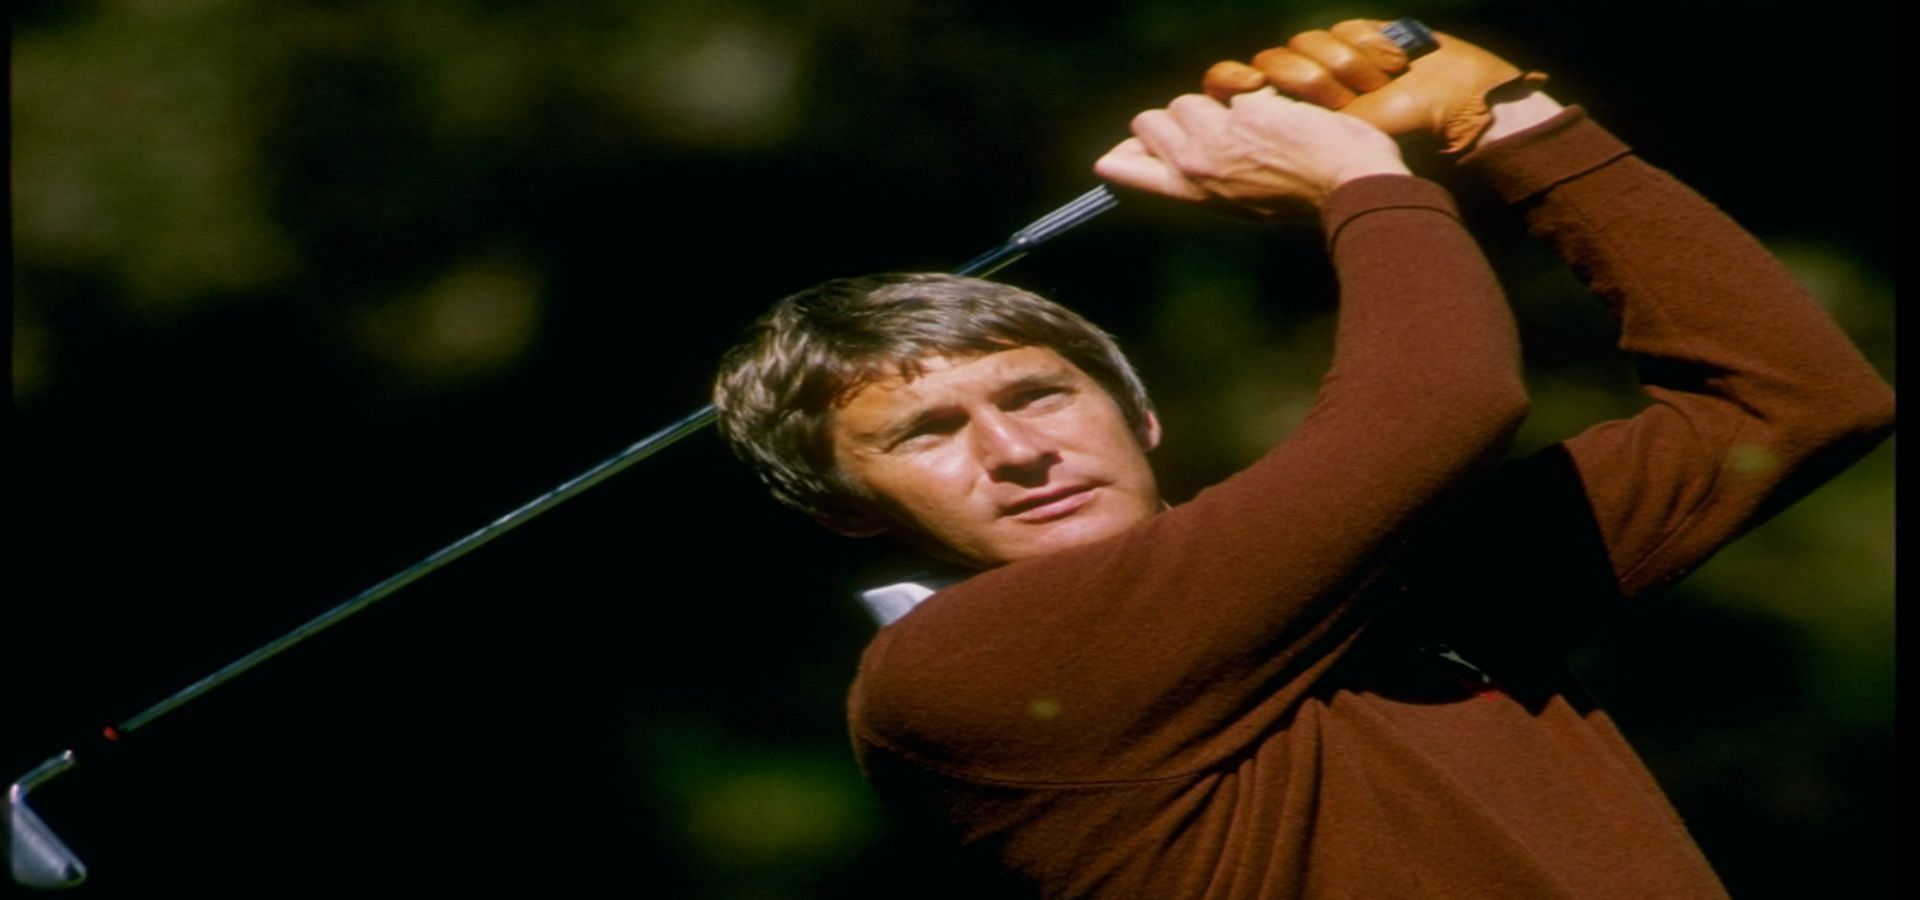 Andy North at the U-S. Open 1978 (Image via Golf Monthly)